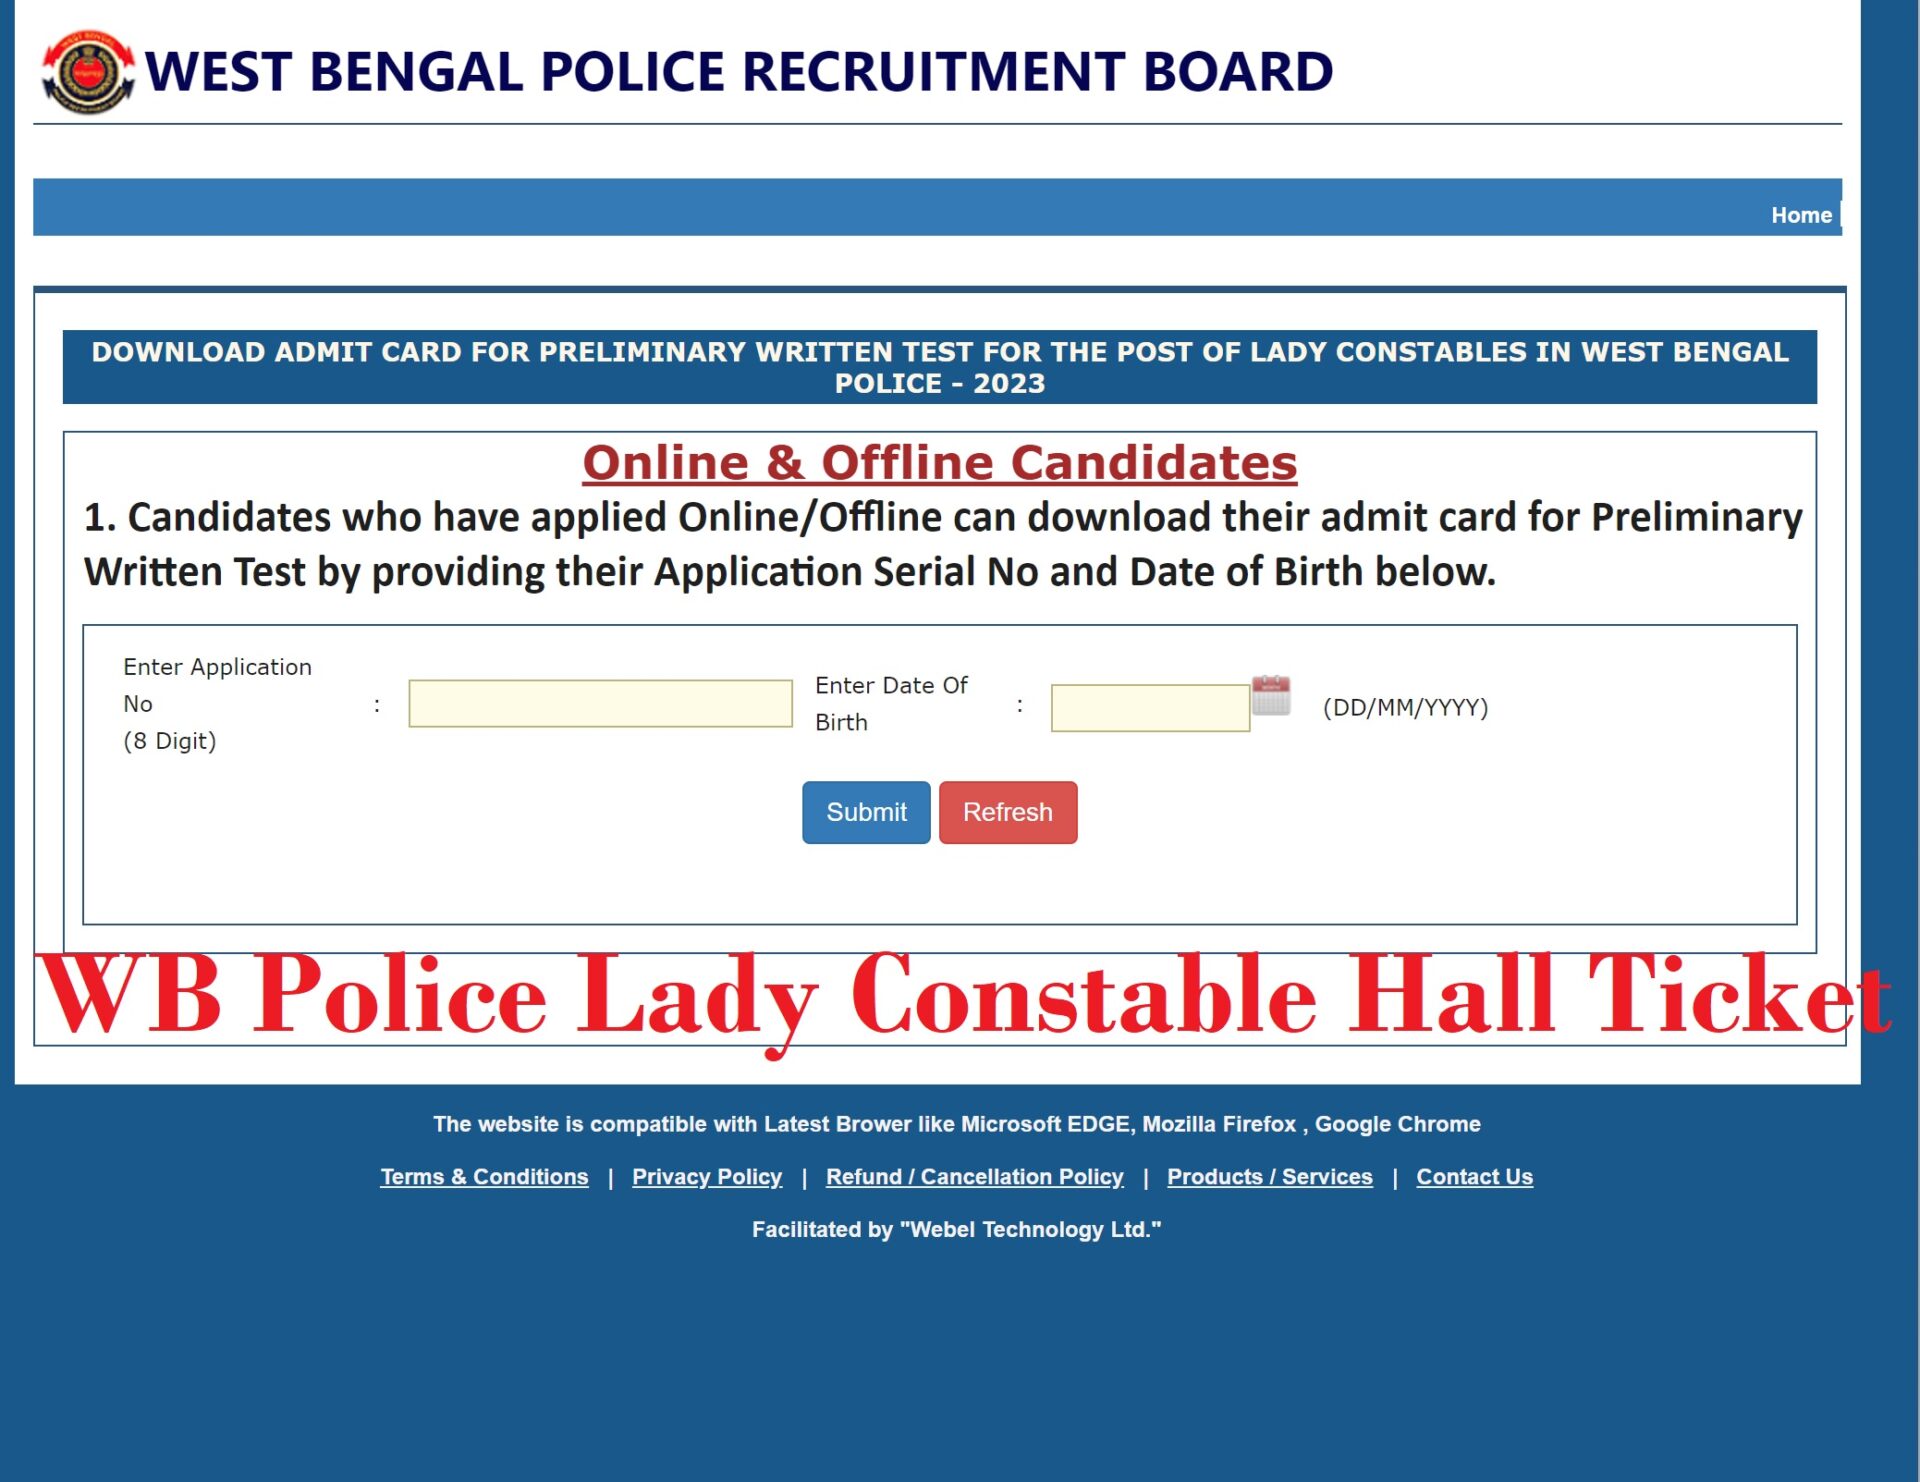 WB Police Lady Constable Hall Ticket